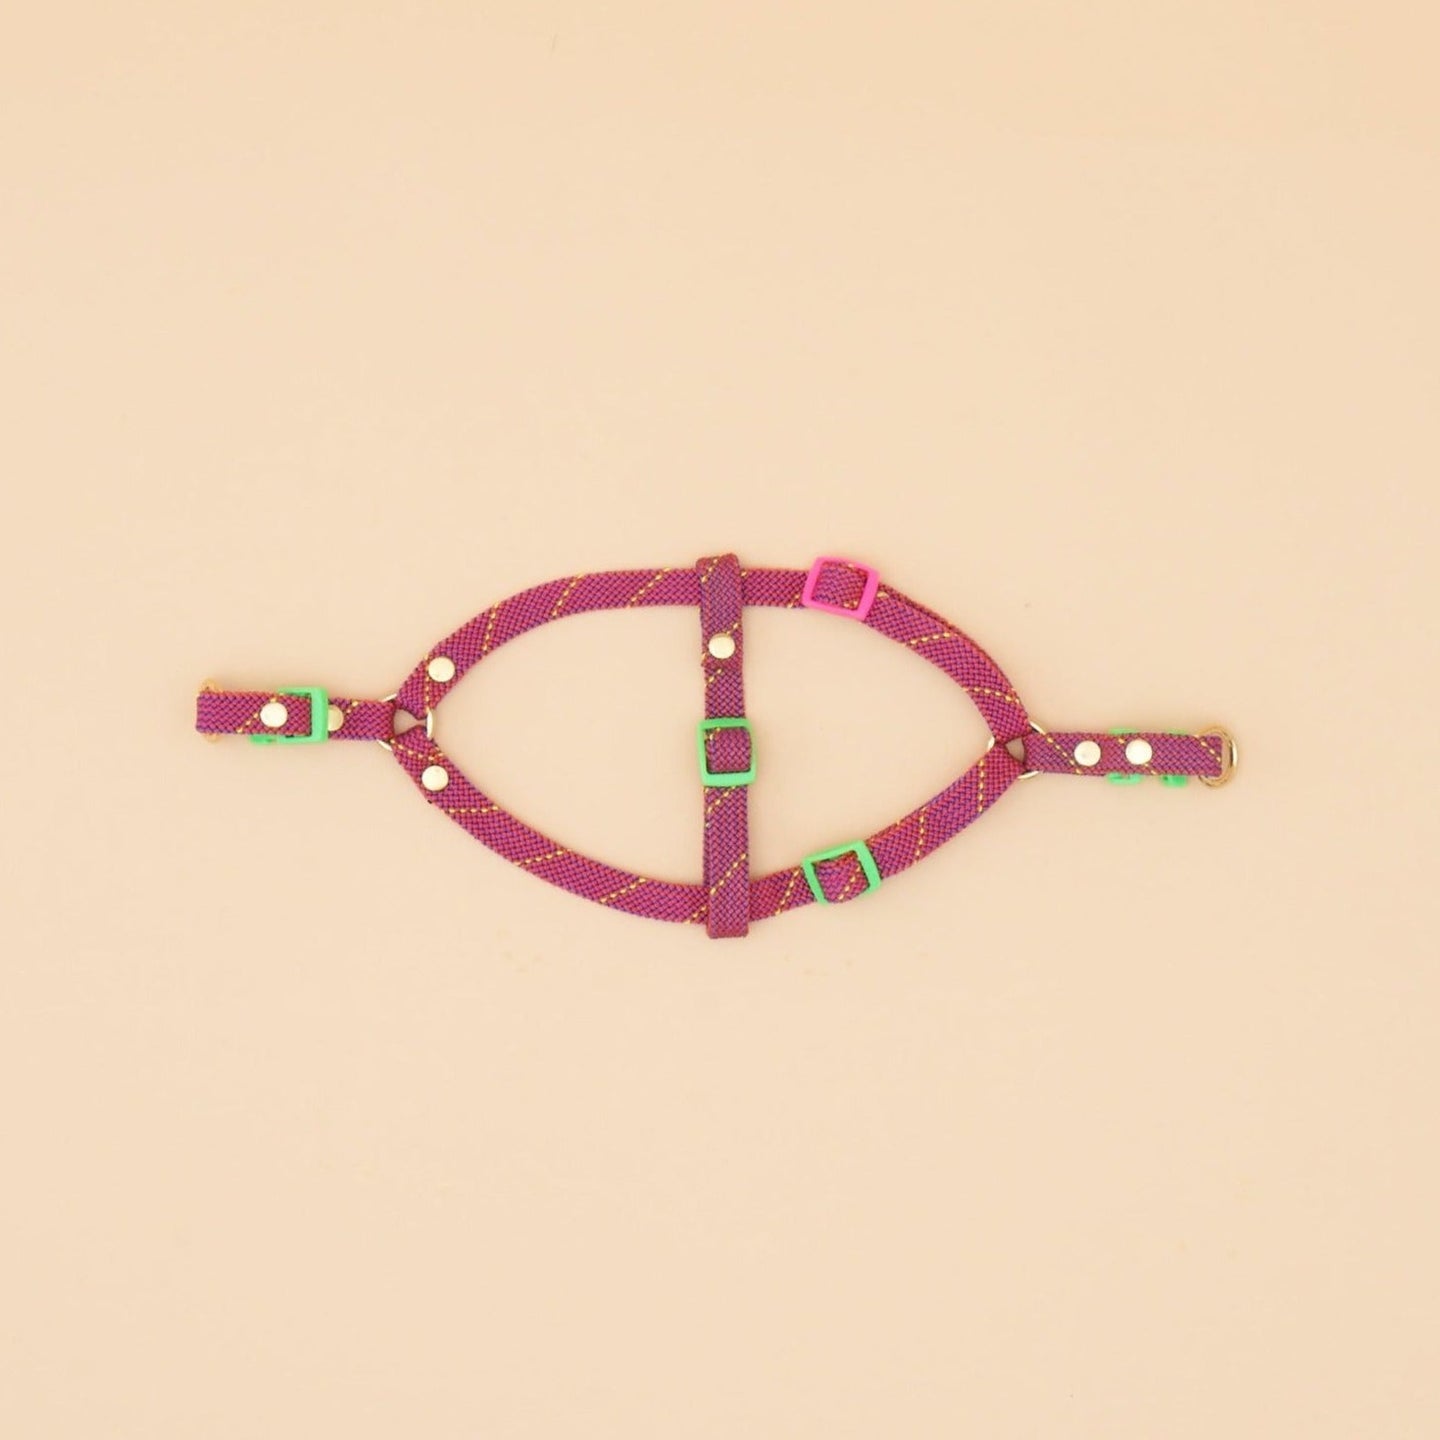 Marley Flat Rope Harness - Pink